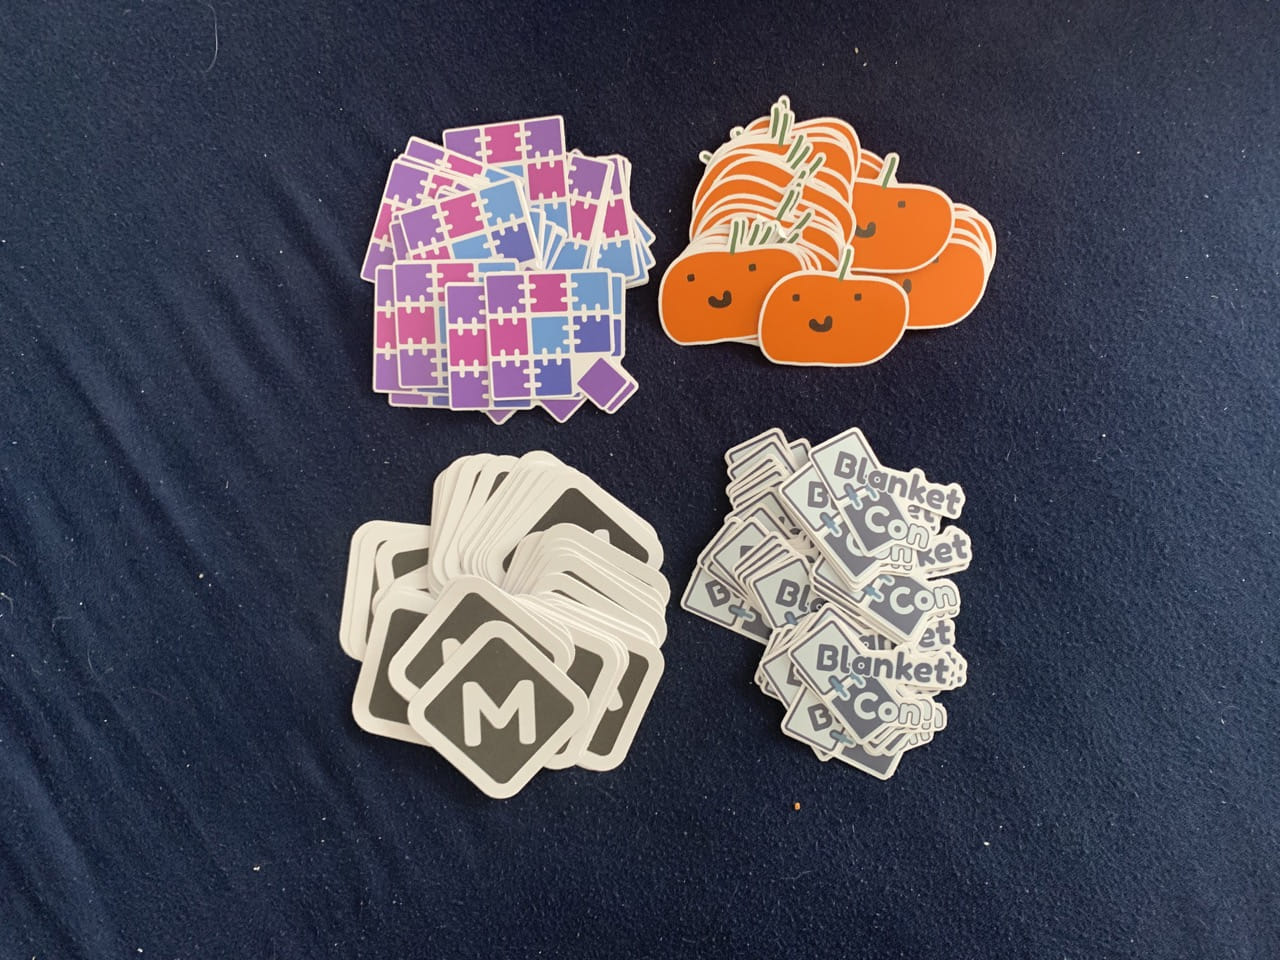 Four piles of stickers arranged in a 2x2 grid. From left to right: Quilt logo, Pineapple, Modfest logo, BlanketCon 2022 logo